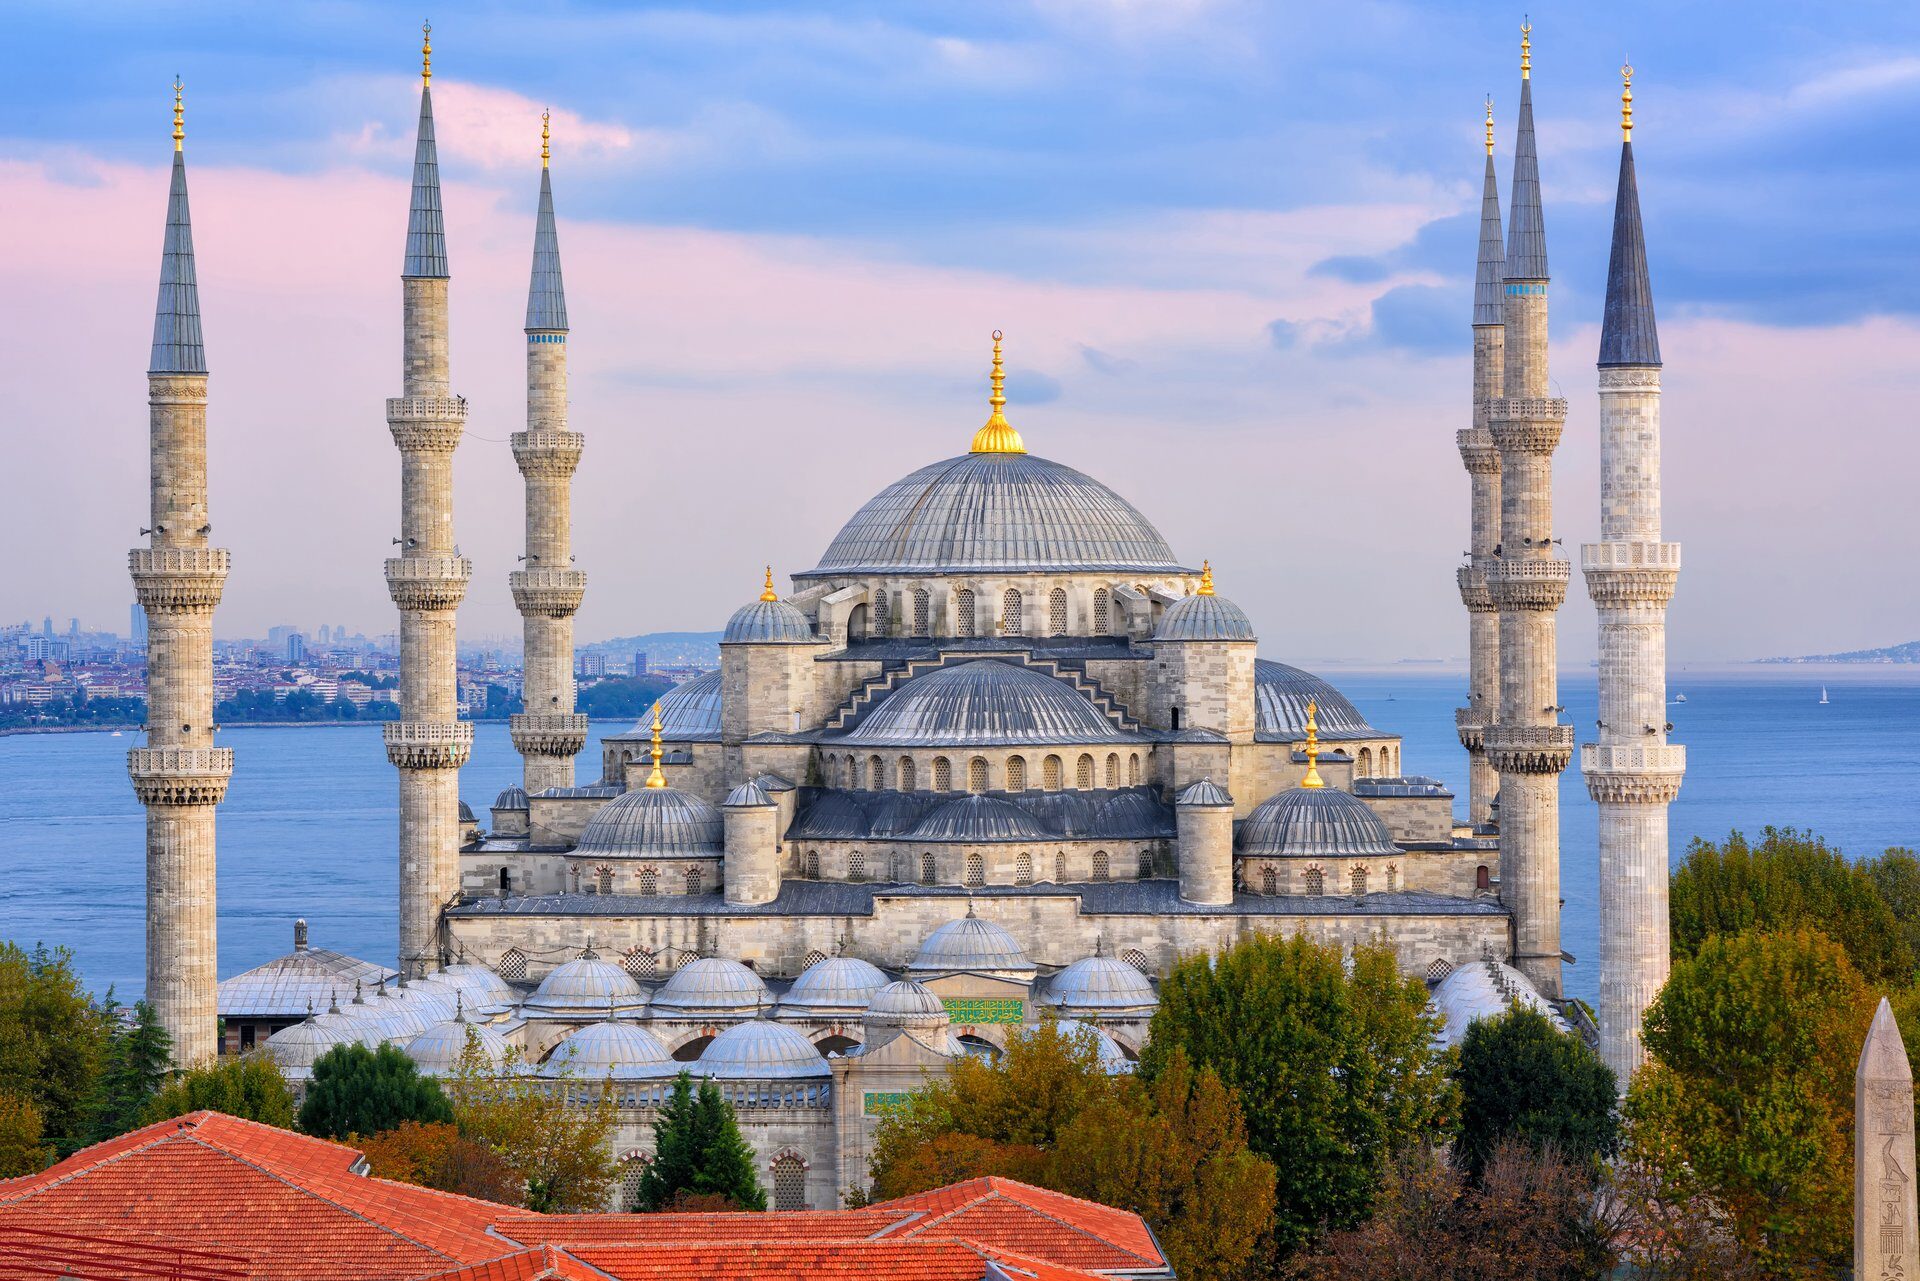 places of interest to visit in istanbul